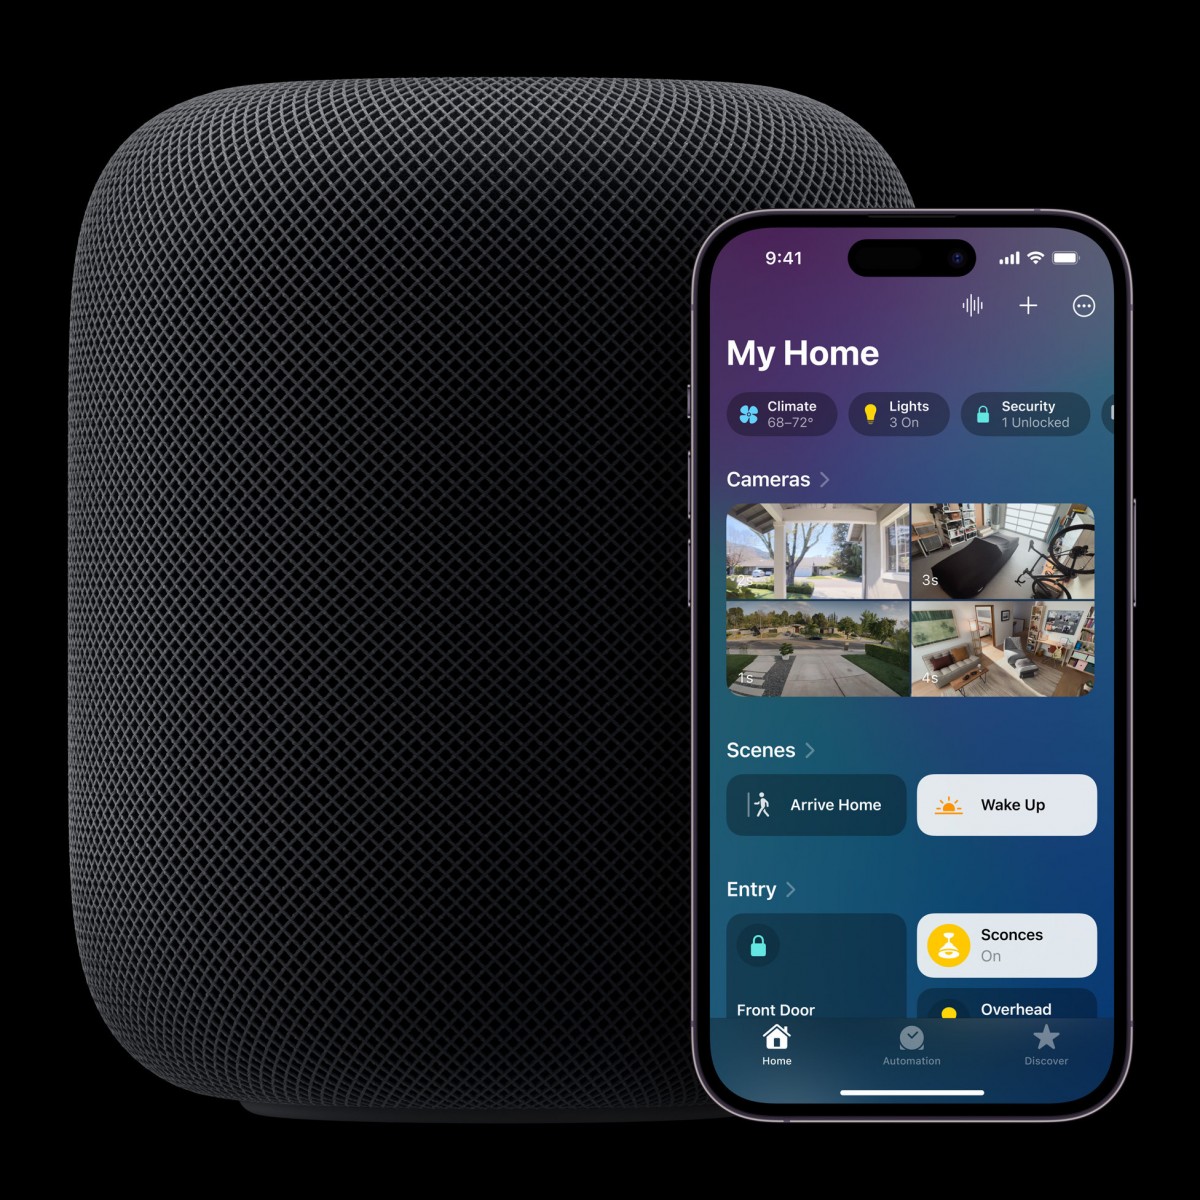 Apple announces second generation HomePod with temperature and humidity sensors